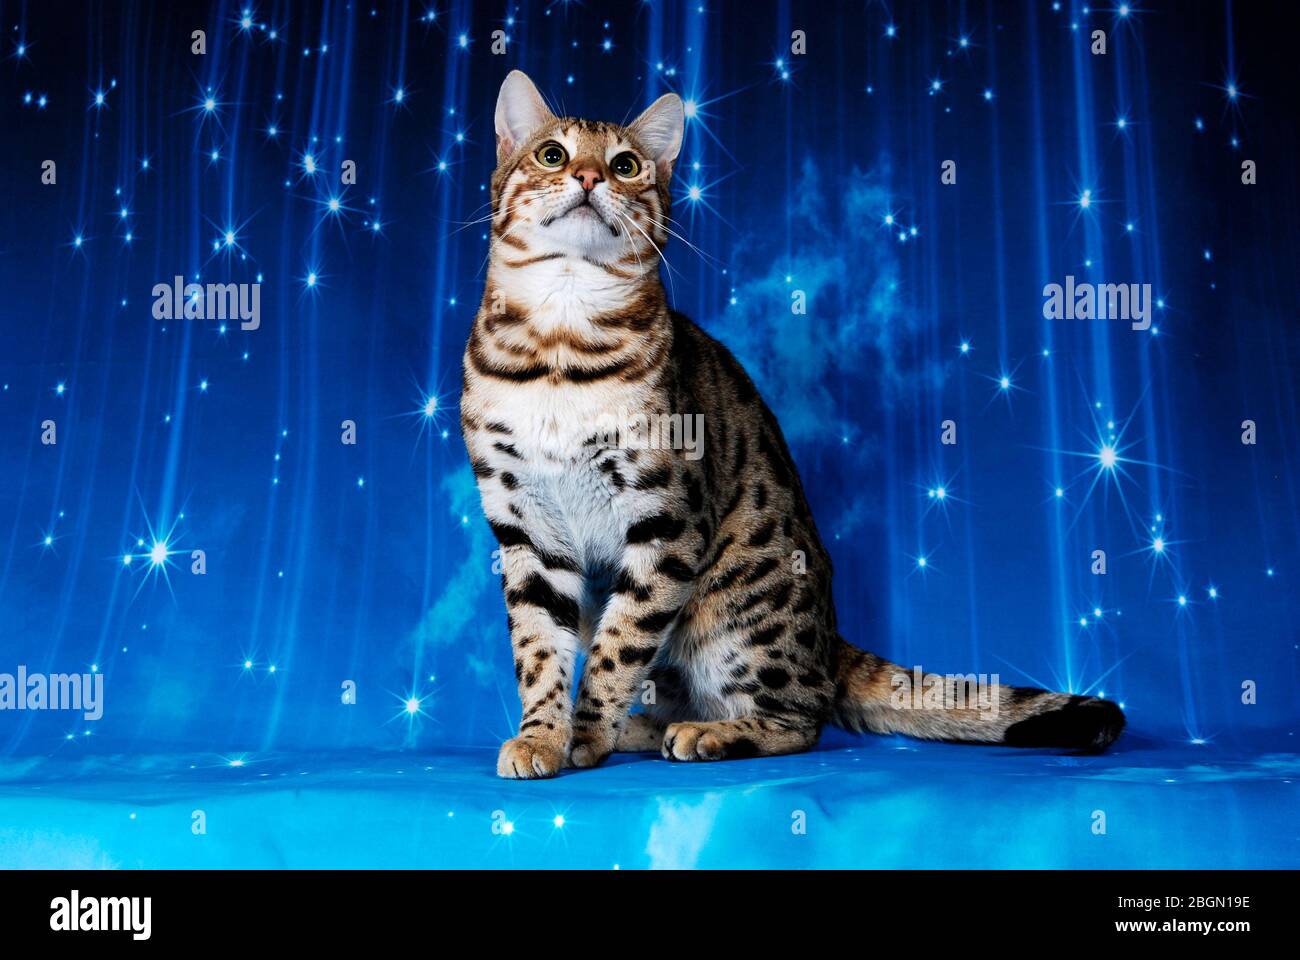 cat show on background full of color Stock Photo Alamy